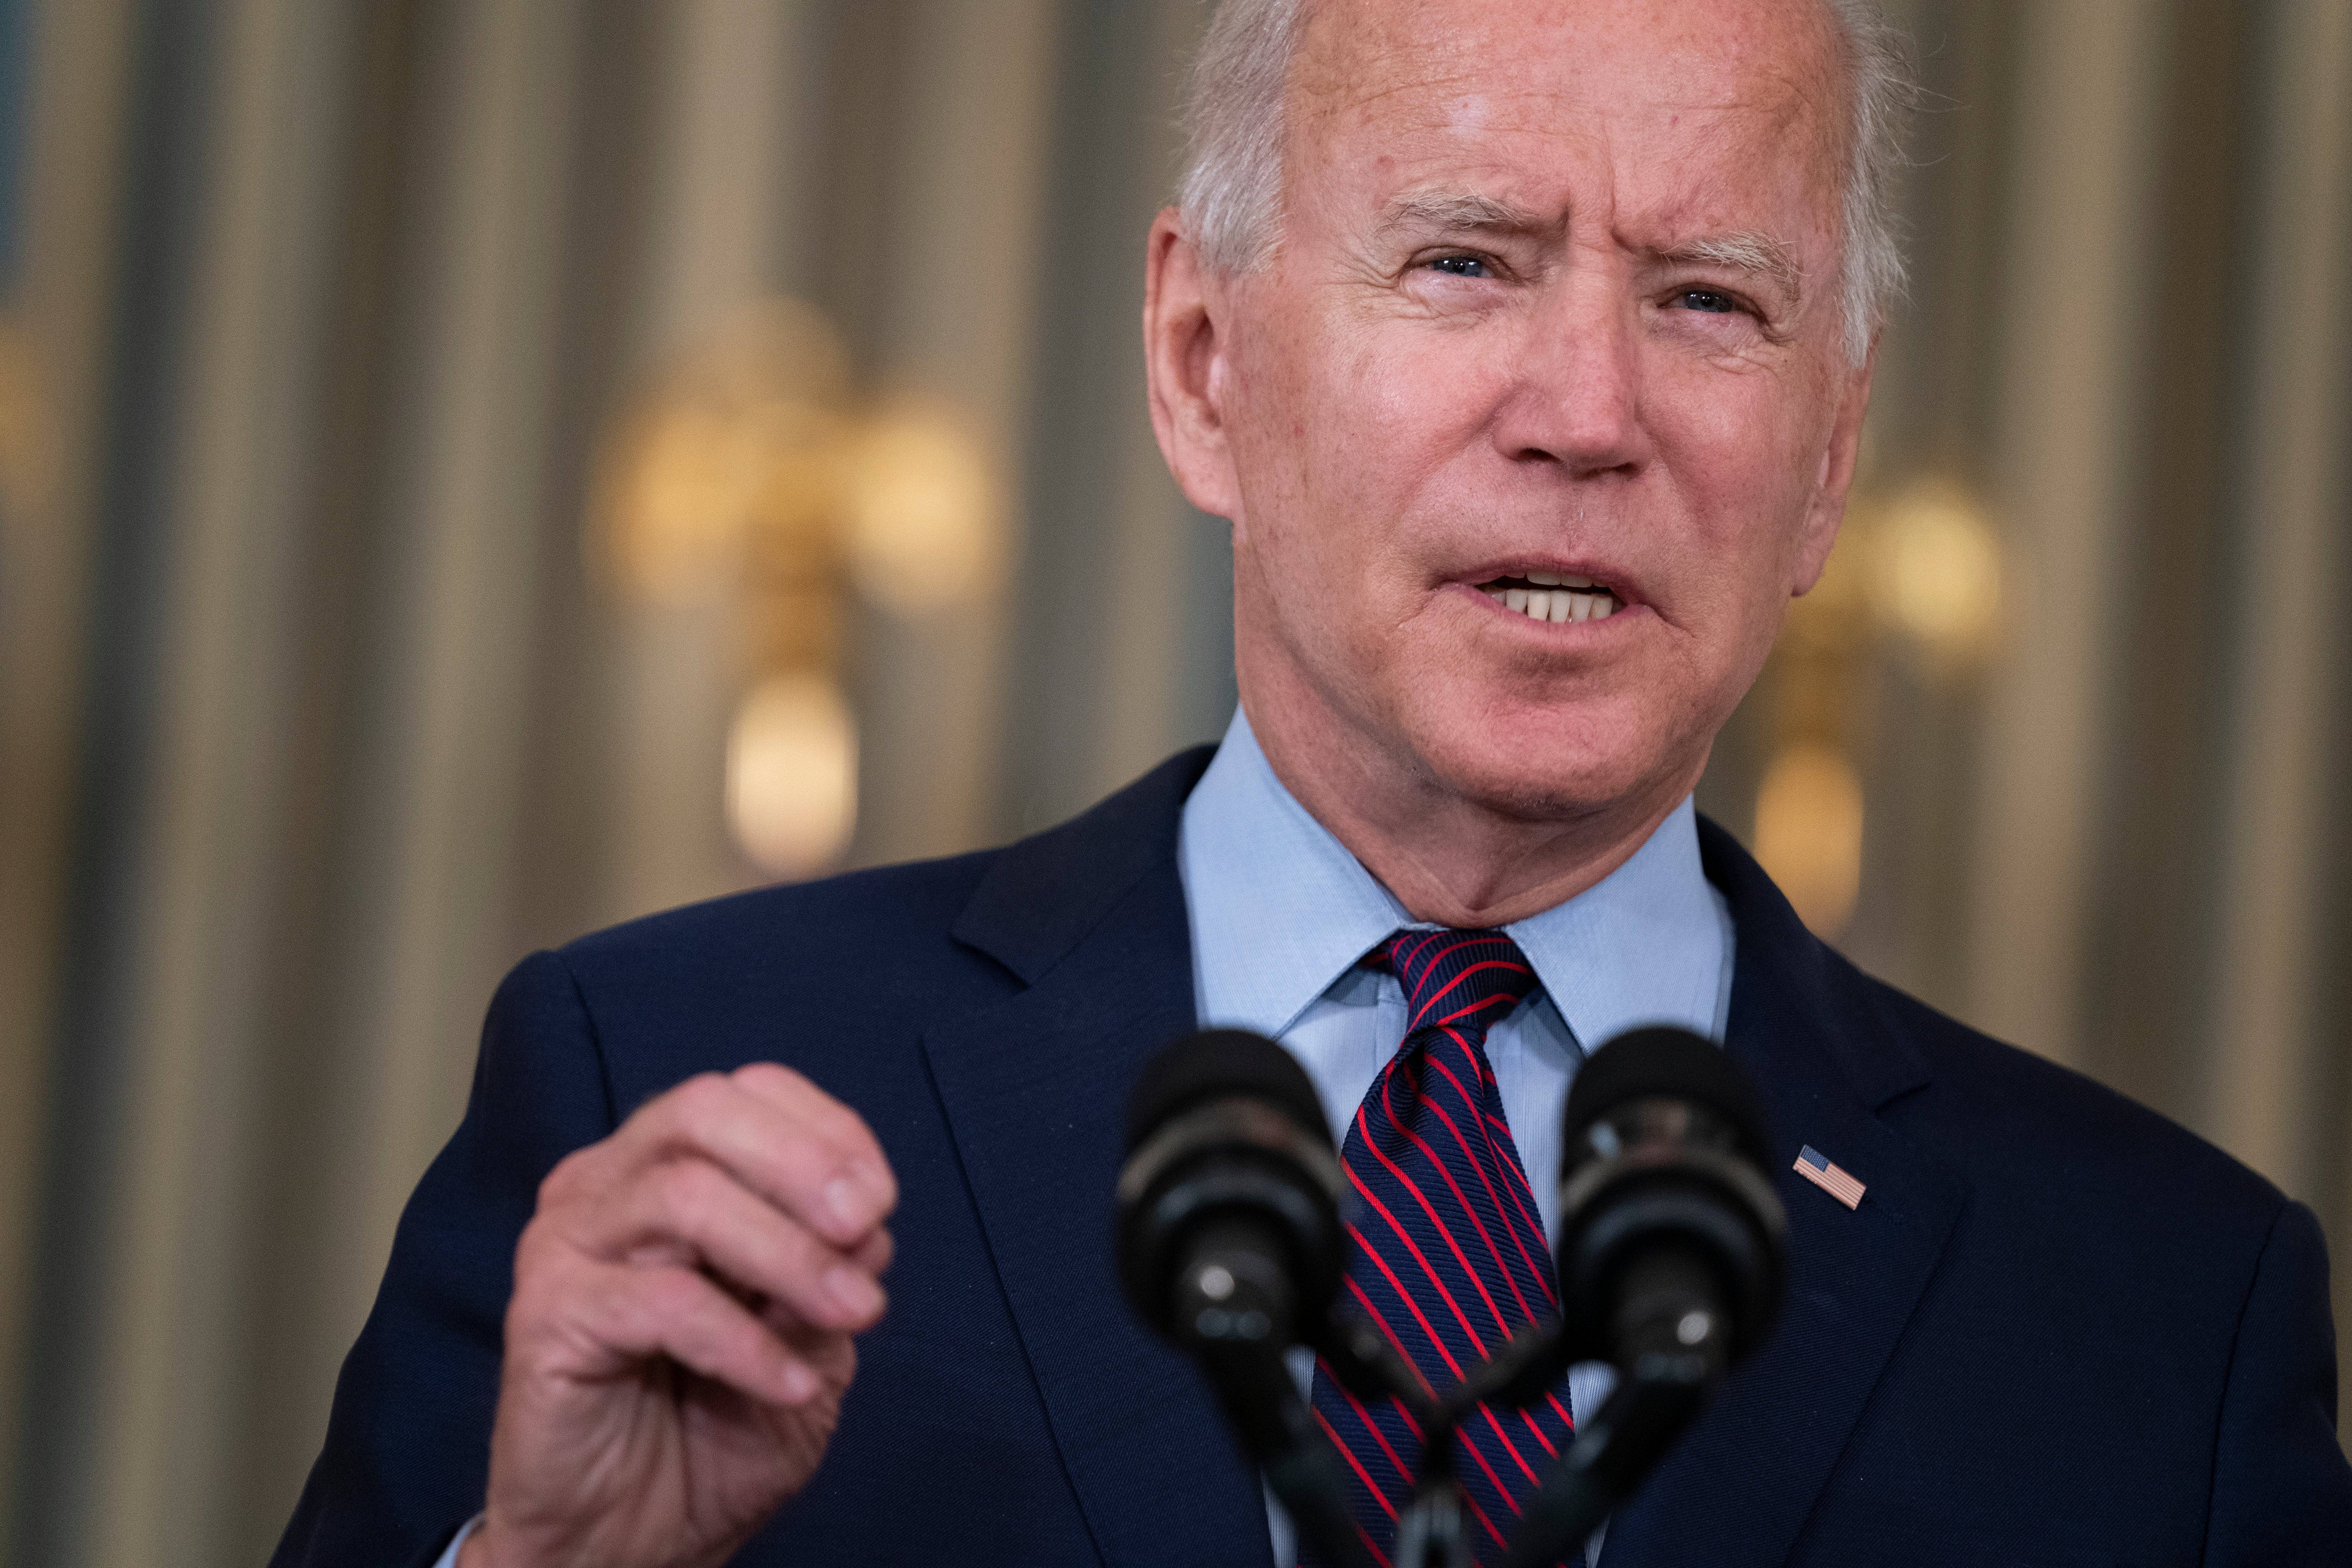 Mr Biden himself has largely avoided speaking about the death penalty since he was sworn in